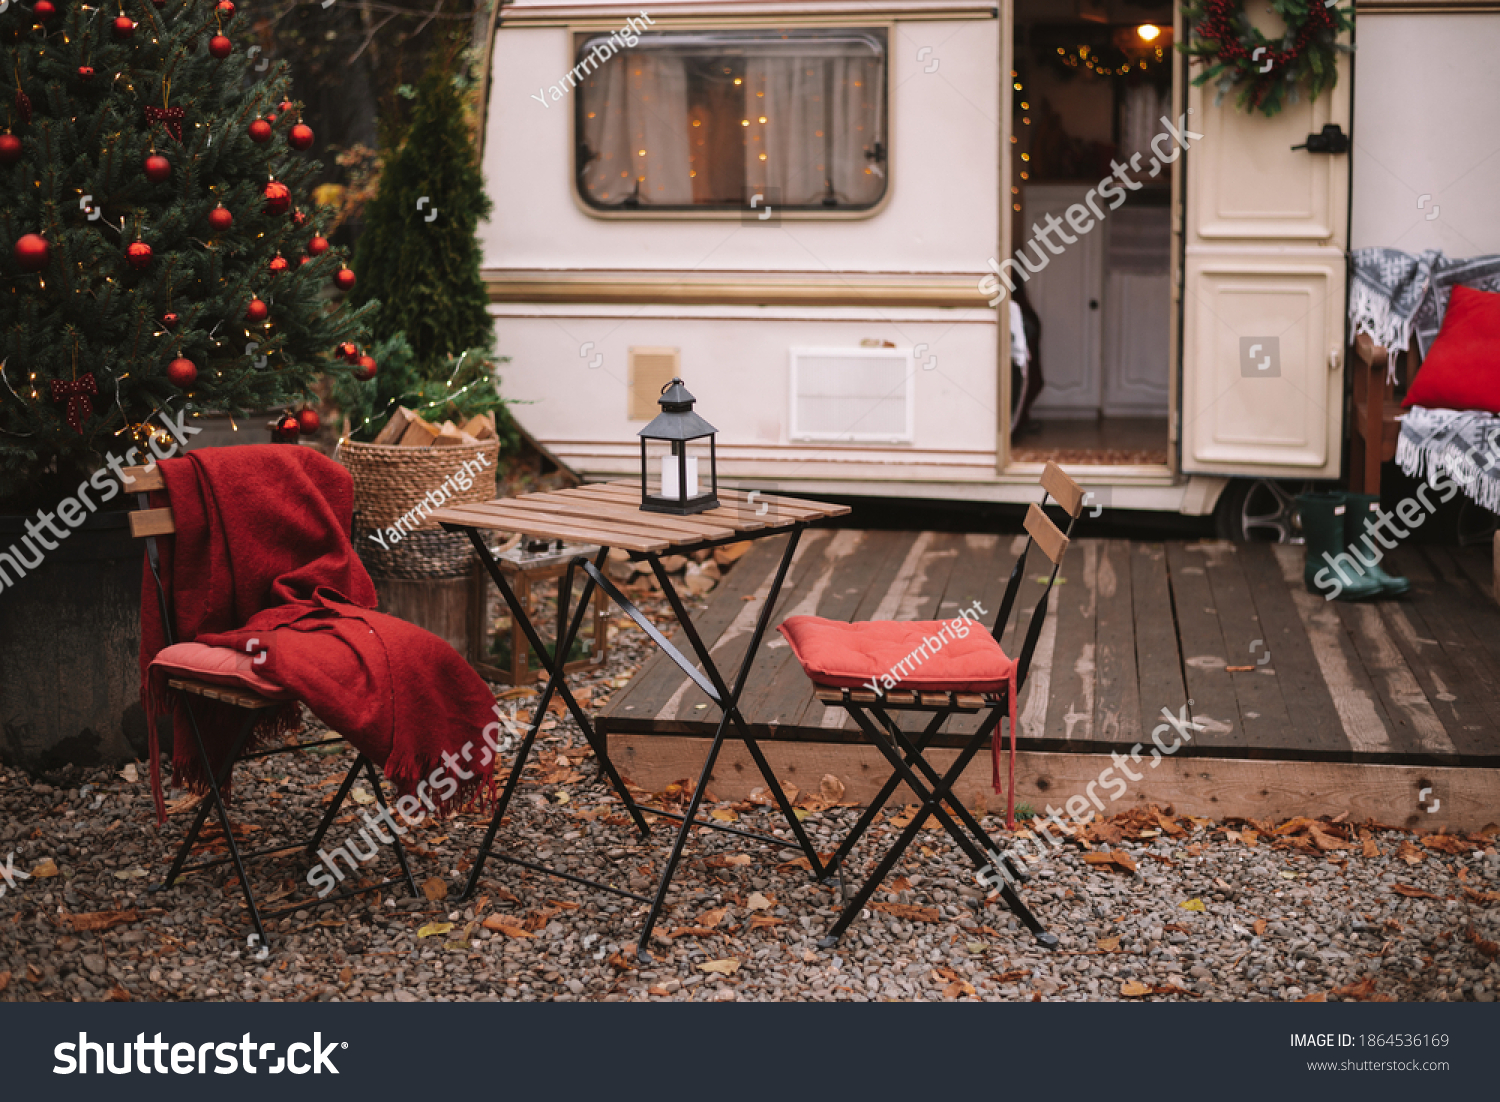 Caravan mobile home with terrace, Mobile home decorated with Christmas decor. Festive atmosphere - lights, red blankets, Christmas trees. Waiting for the snow. Caravan camping. mobile home trailer. #1864536169